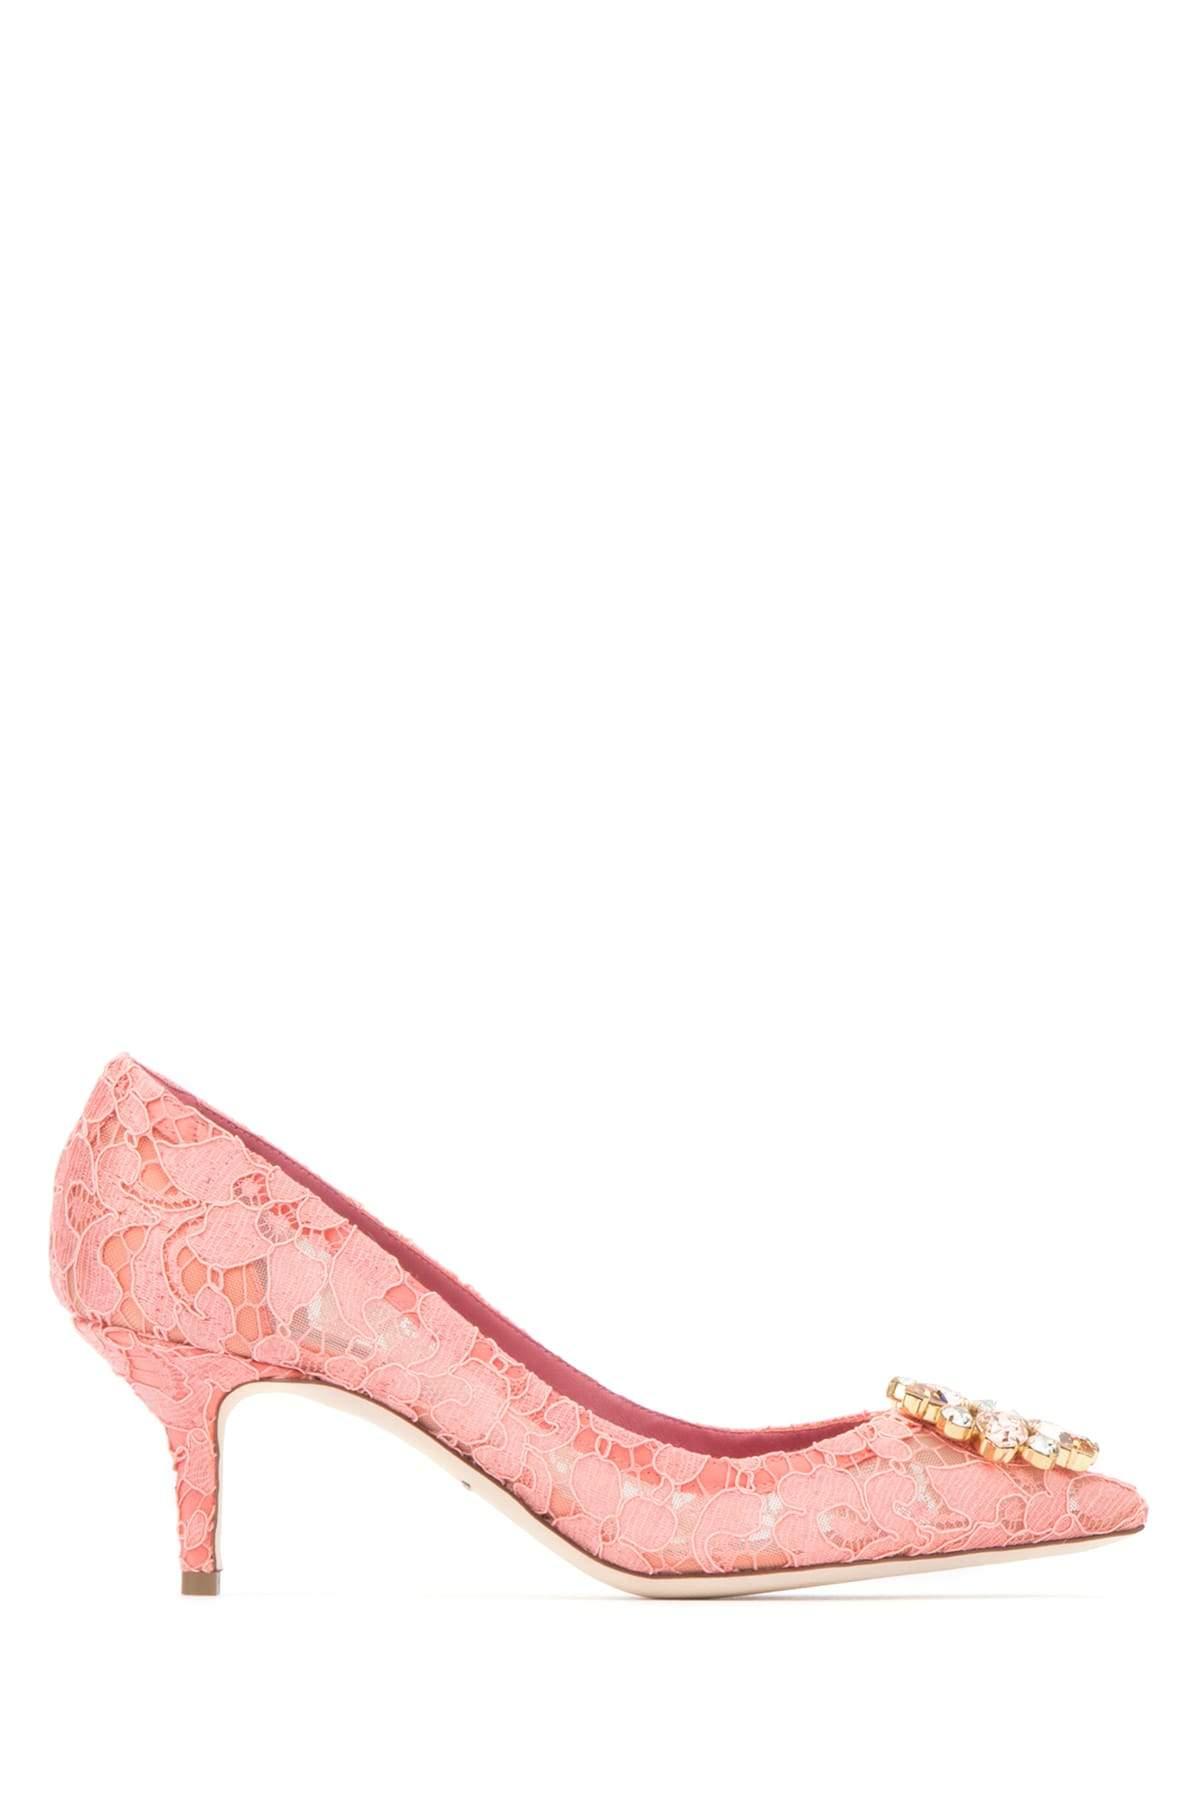 Dolce & Gabbana Bellucci Embellished Lace Pumps in Pink - Lyst